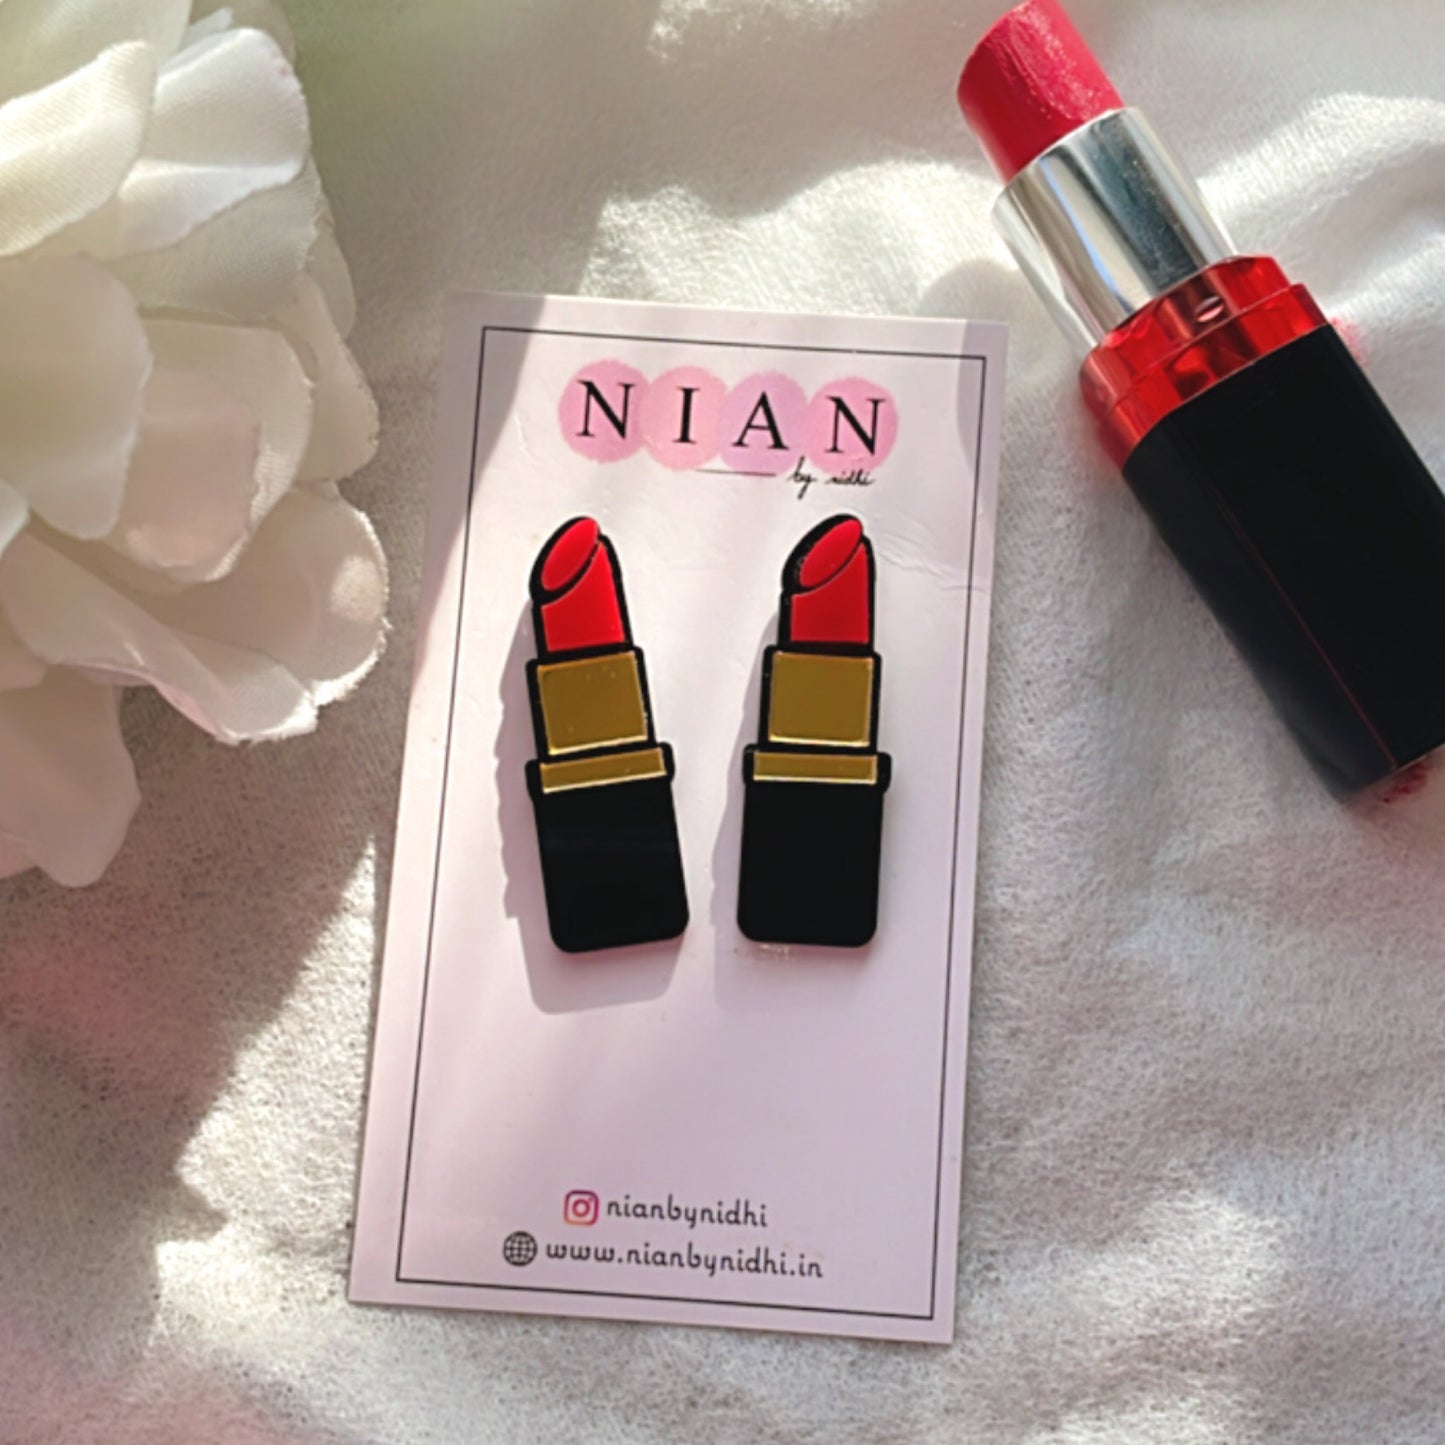 Lipstick Studs - Black and Red - Nian by Nidhi - placed in a white background, along with an actual lipstick